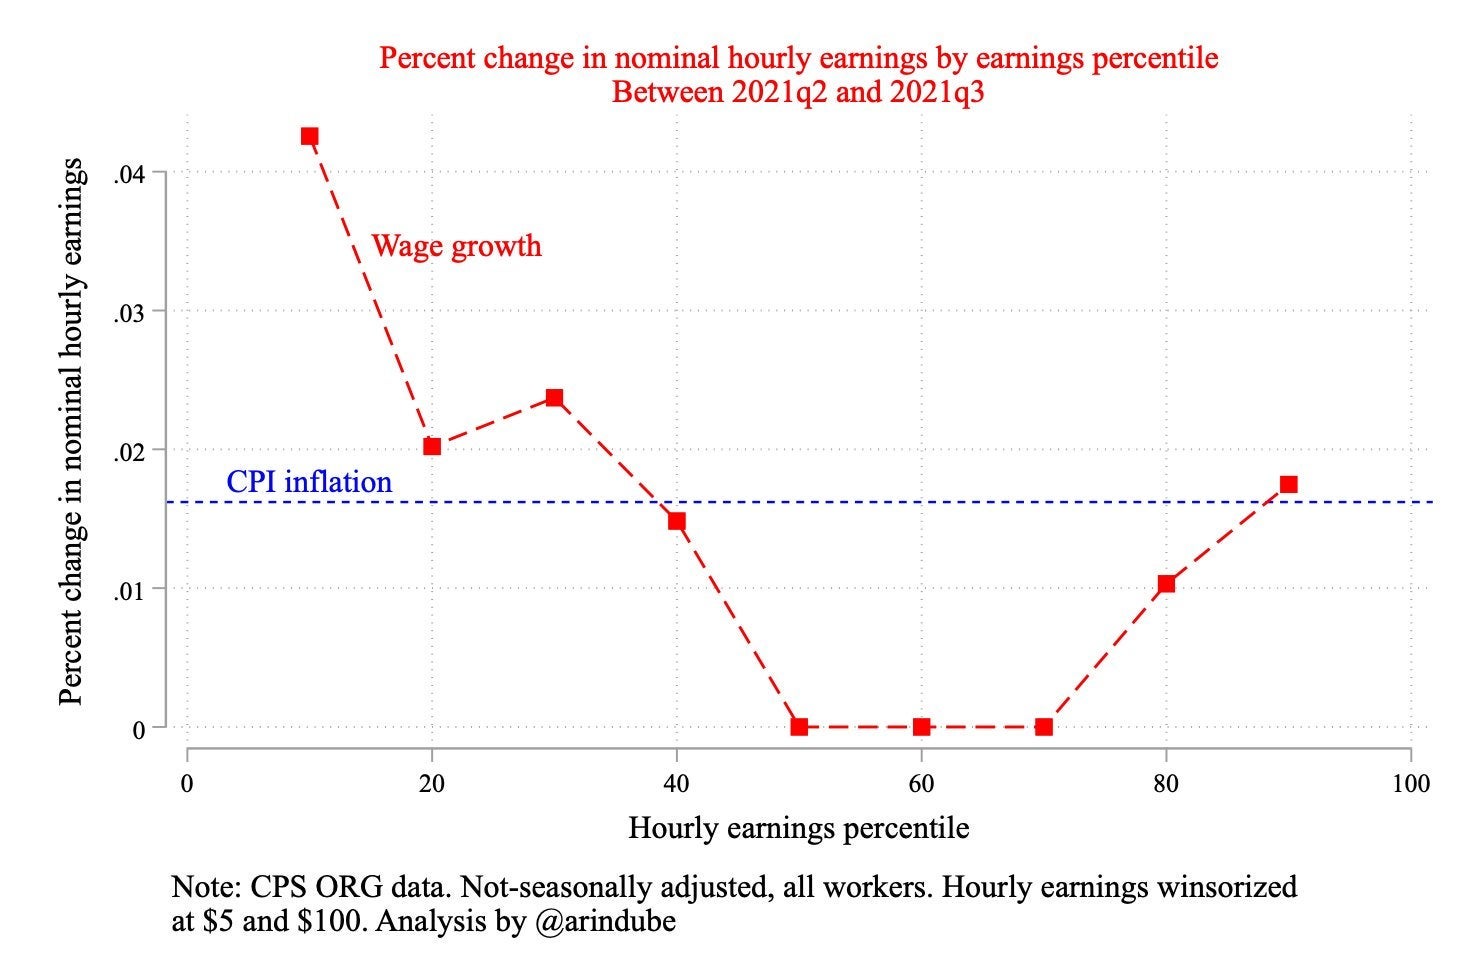 Chart showing percent change in nominal hourly earnings by earnings percentile